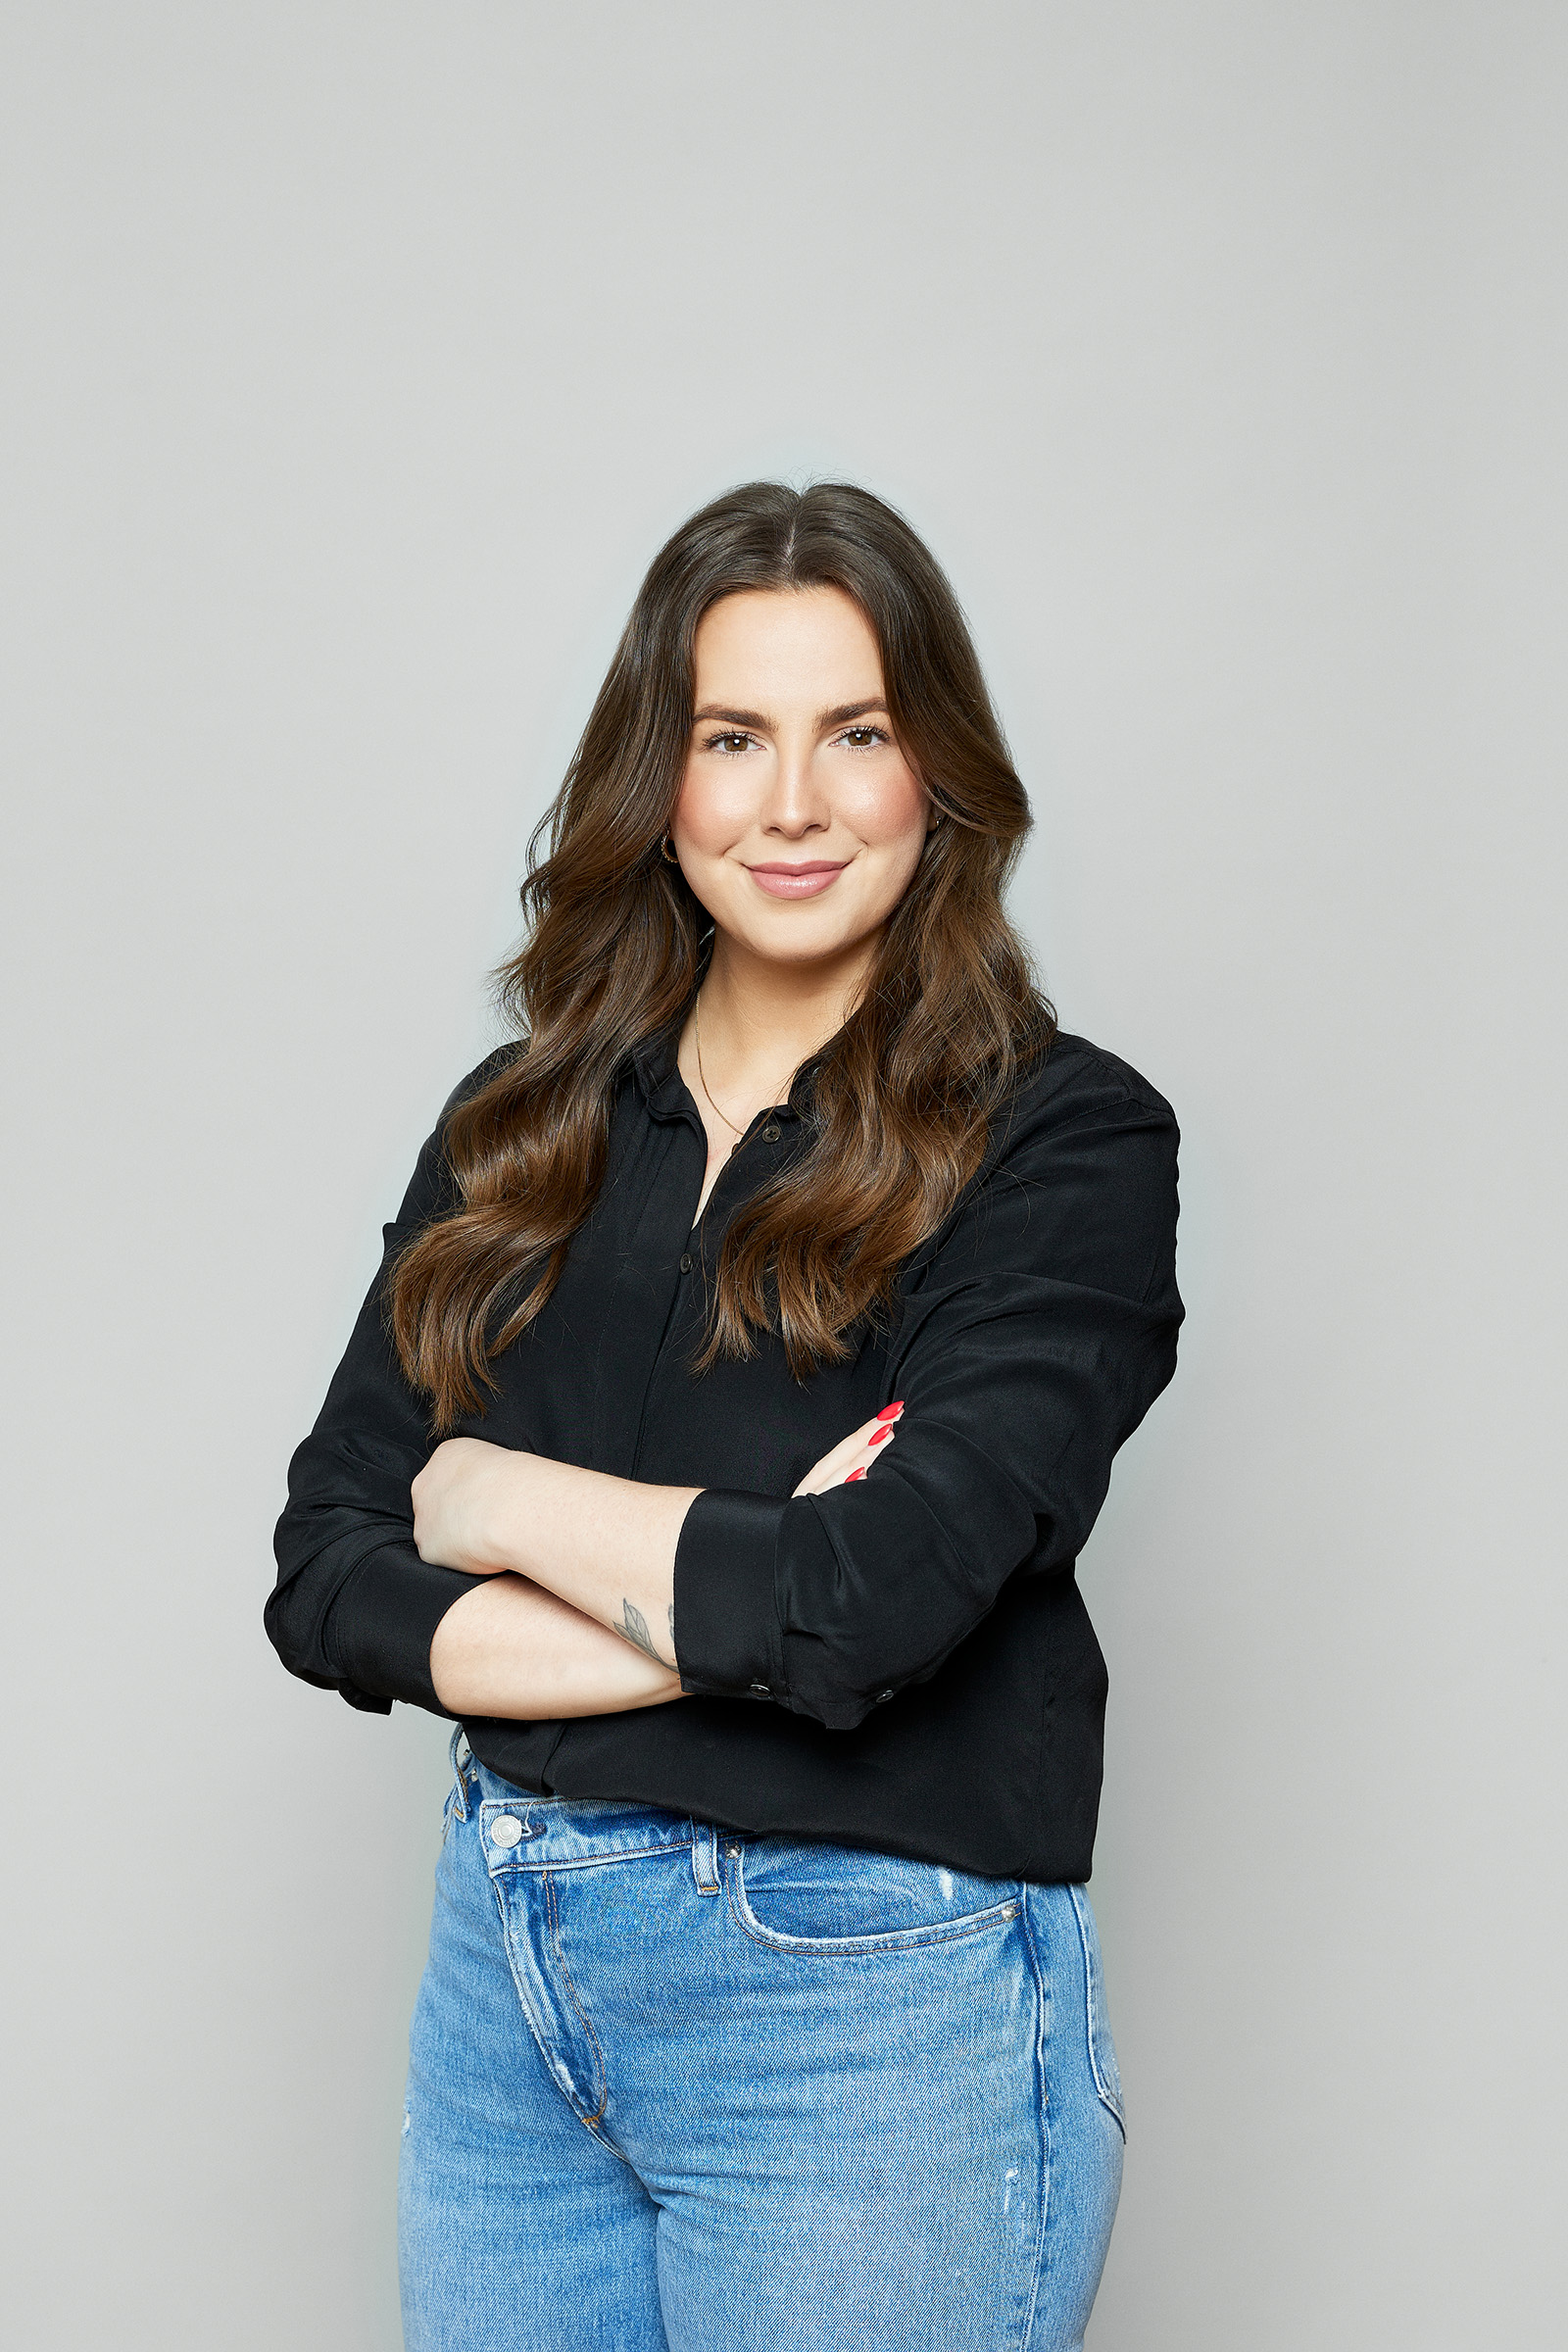 A woman in jeans and a black shirt posing for a photo at an event.